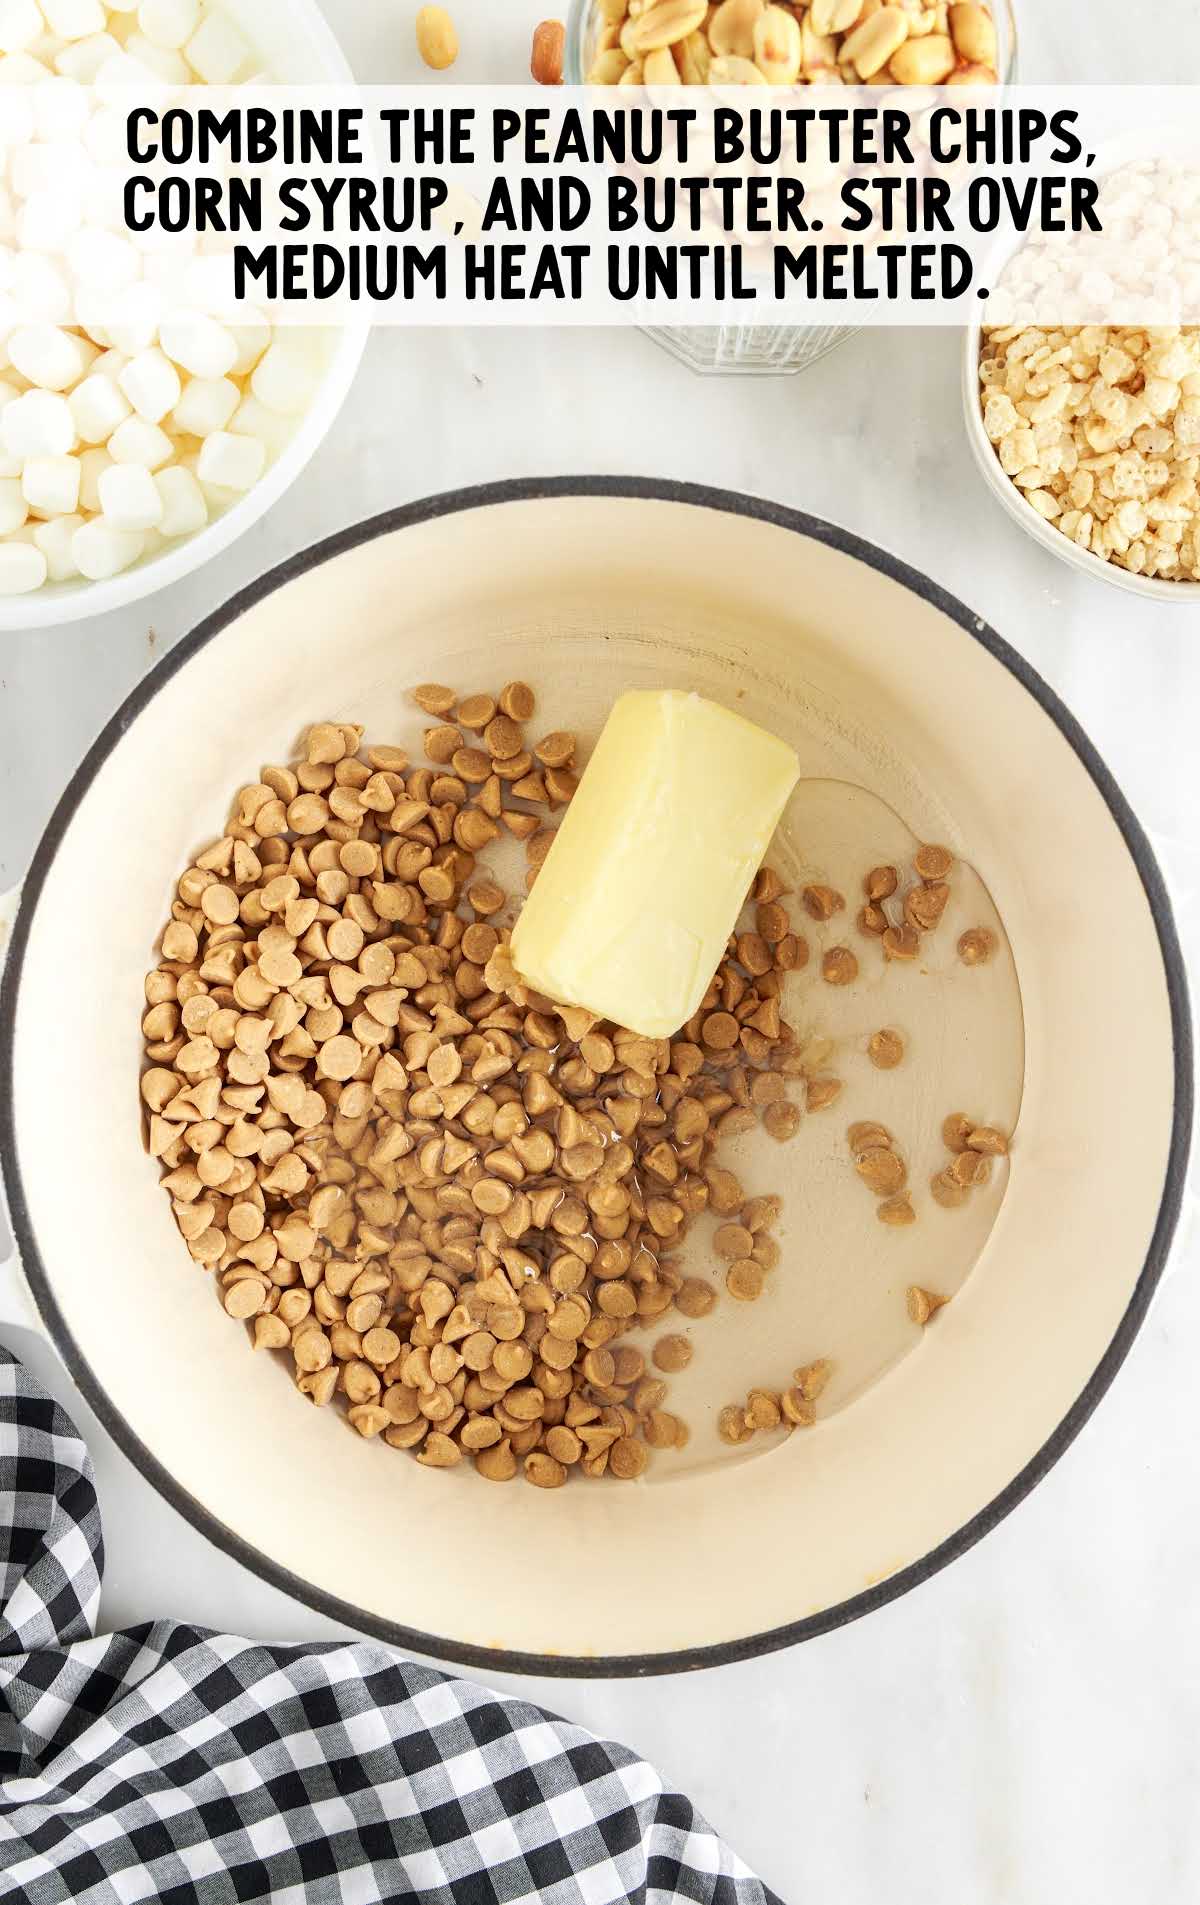 peanut butter chips, corn syrup, and butter combined in a bowl